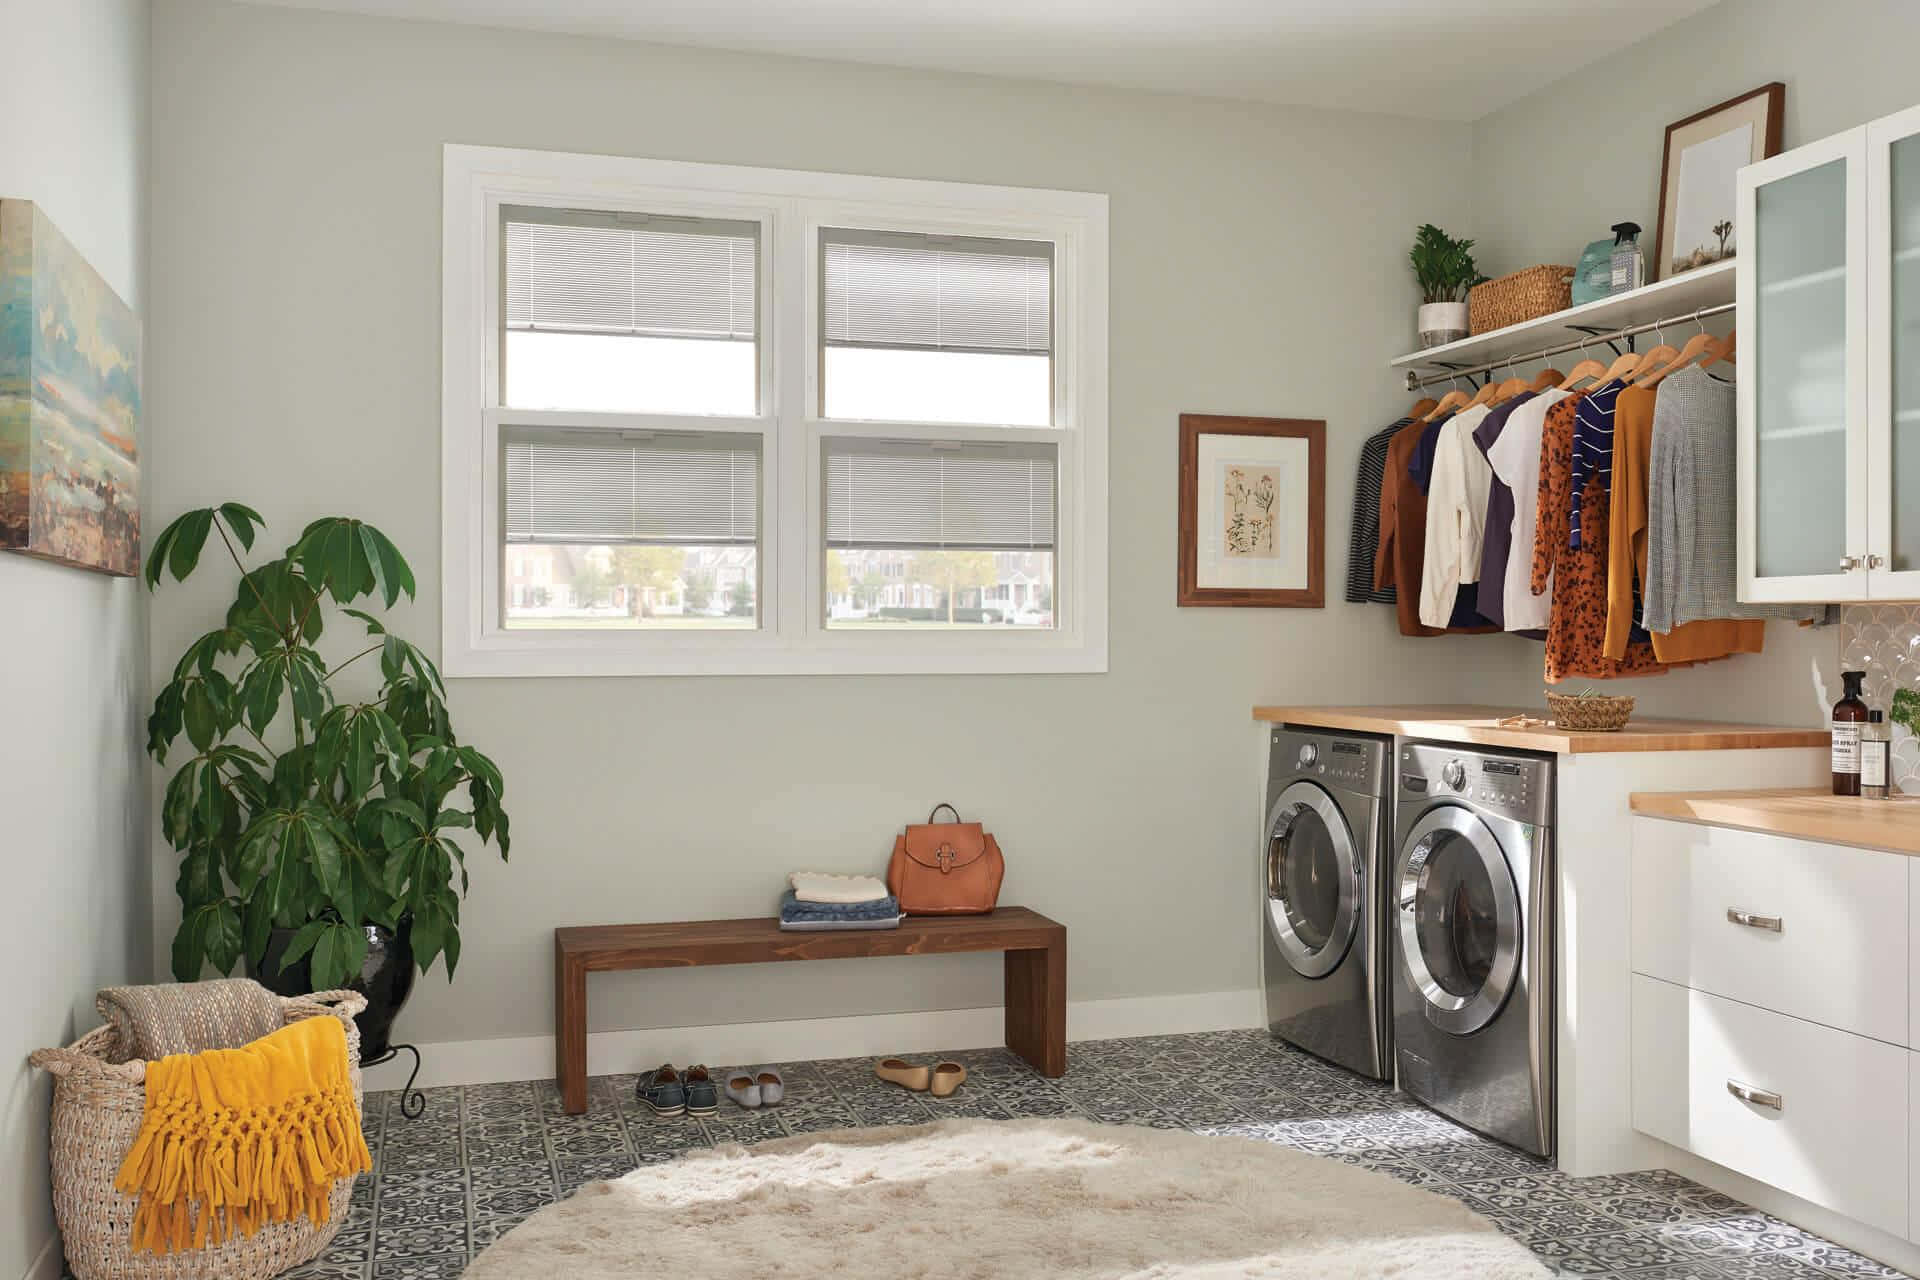 A Laundry Room With A Washer And Dryer